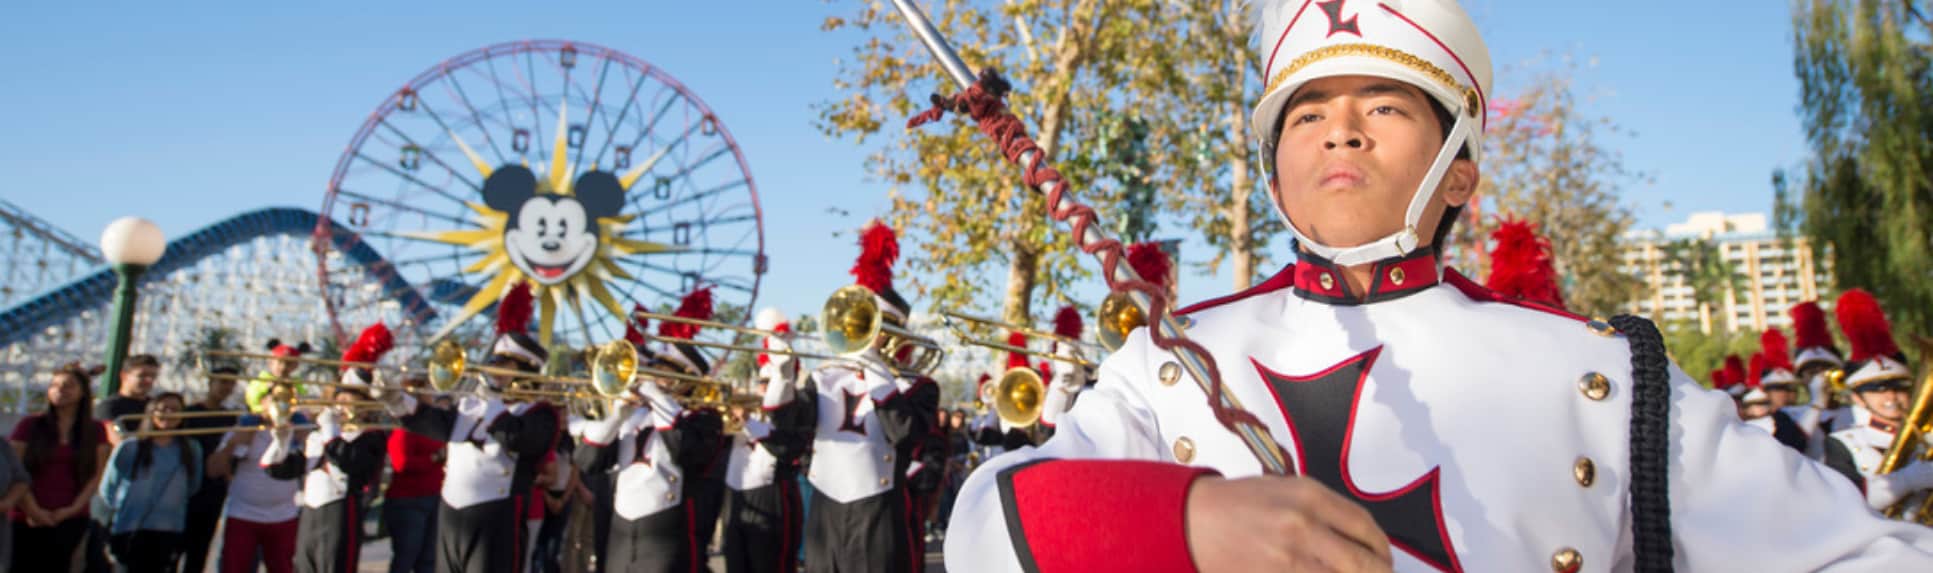 A marching band performs at Disney California Adventure Park